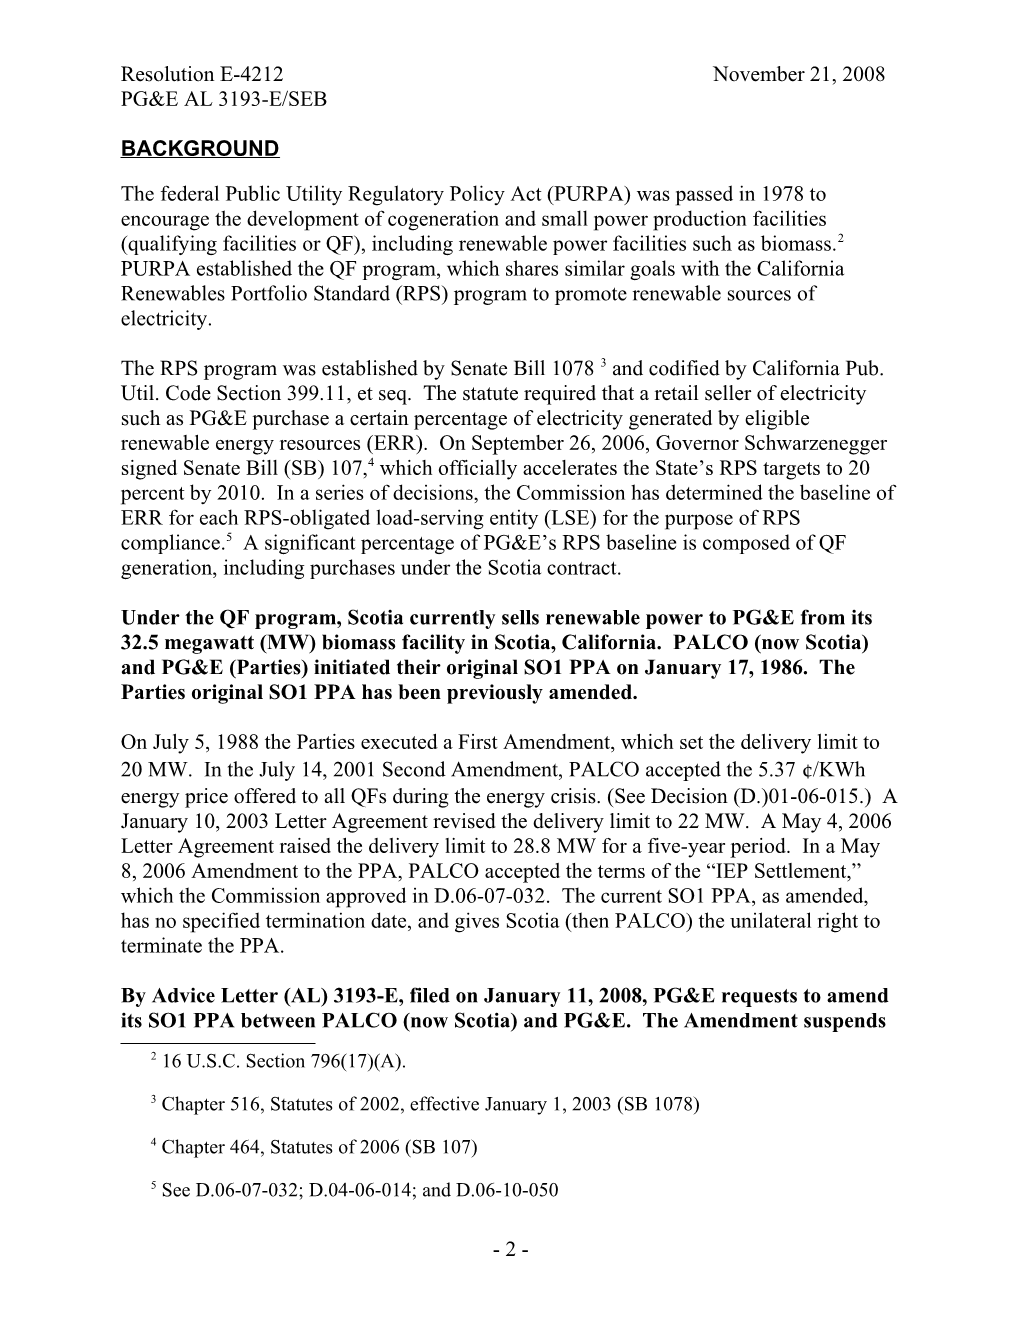 Public Utilities Commission of the State of California s33